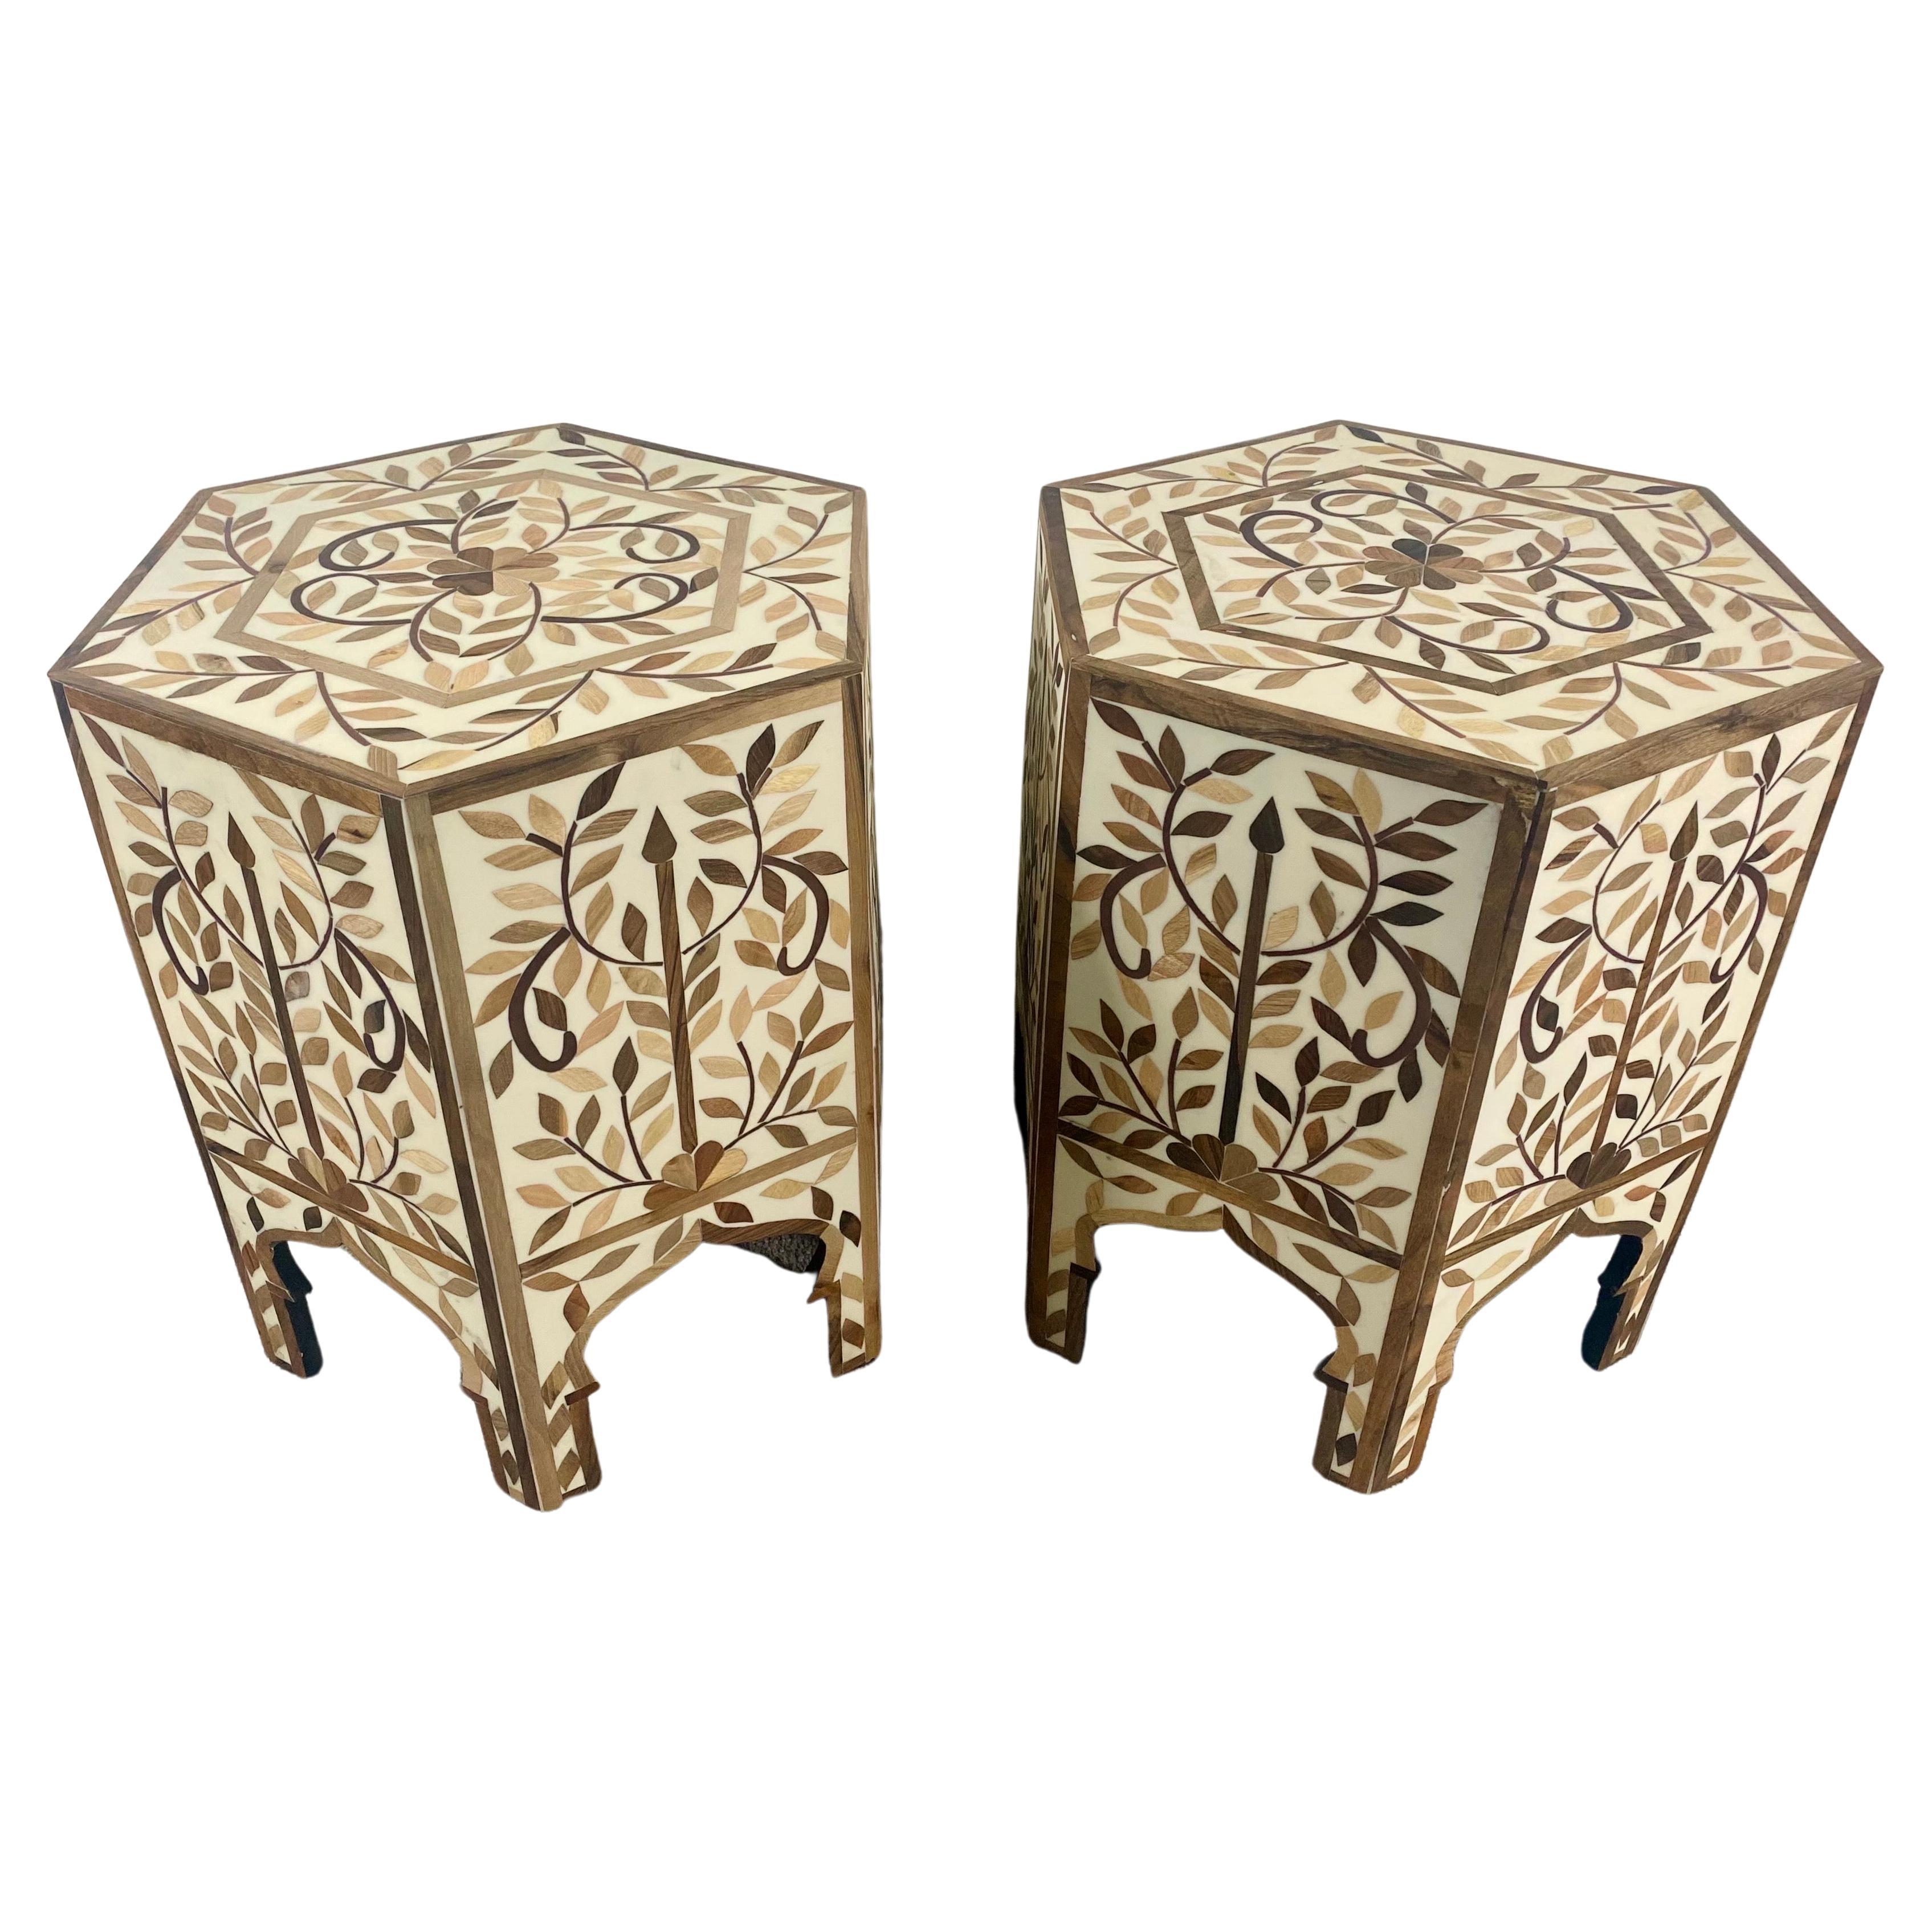 Moroccan Boho Chic Leaf Design Resin & Walnut Hexagonal Side or End Table, Pair For Sale